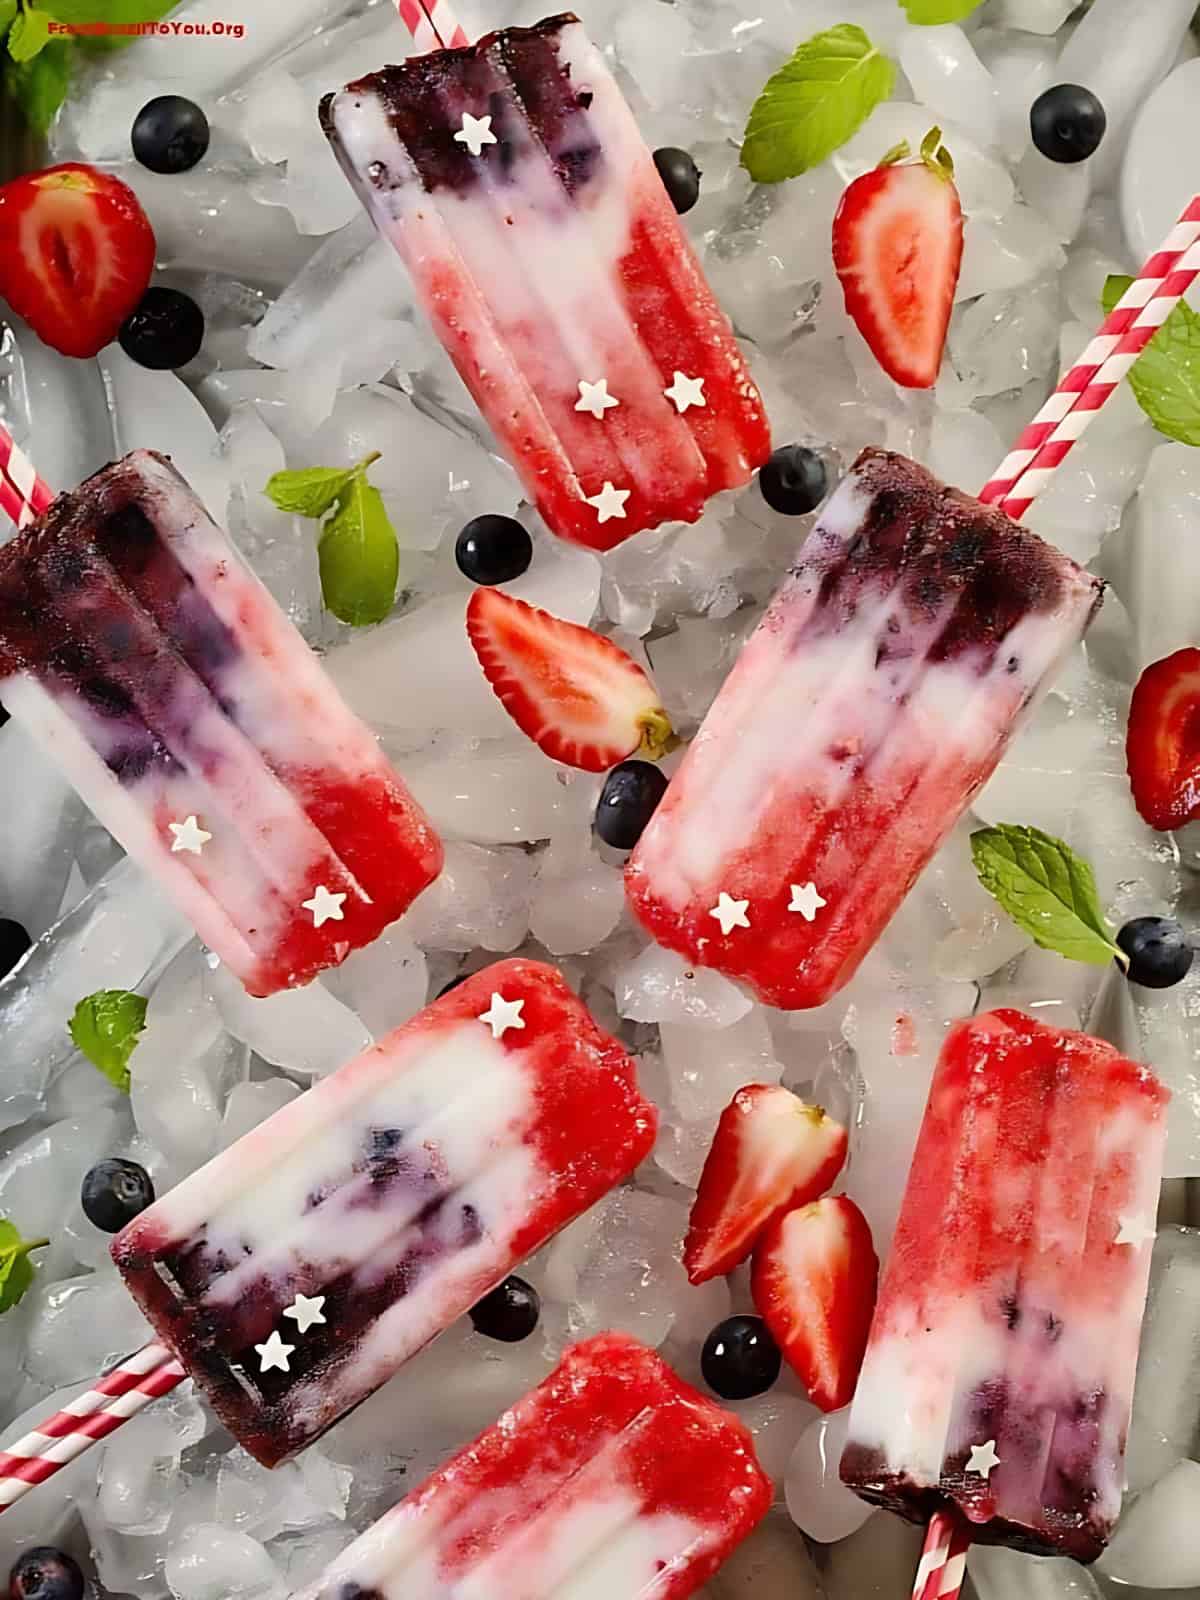 Berry yogurt popsicles resting on ice cubes next to strawberries and blue berries..